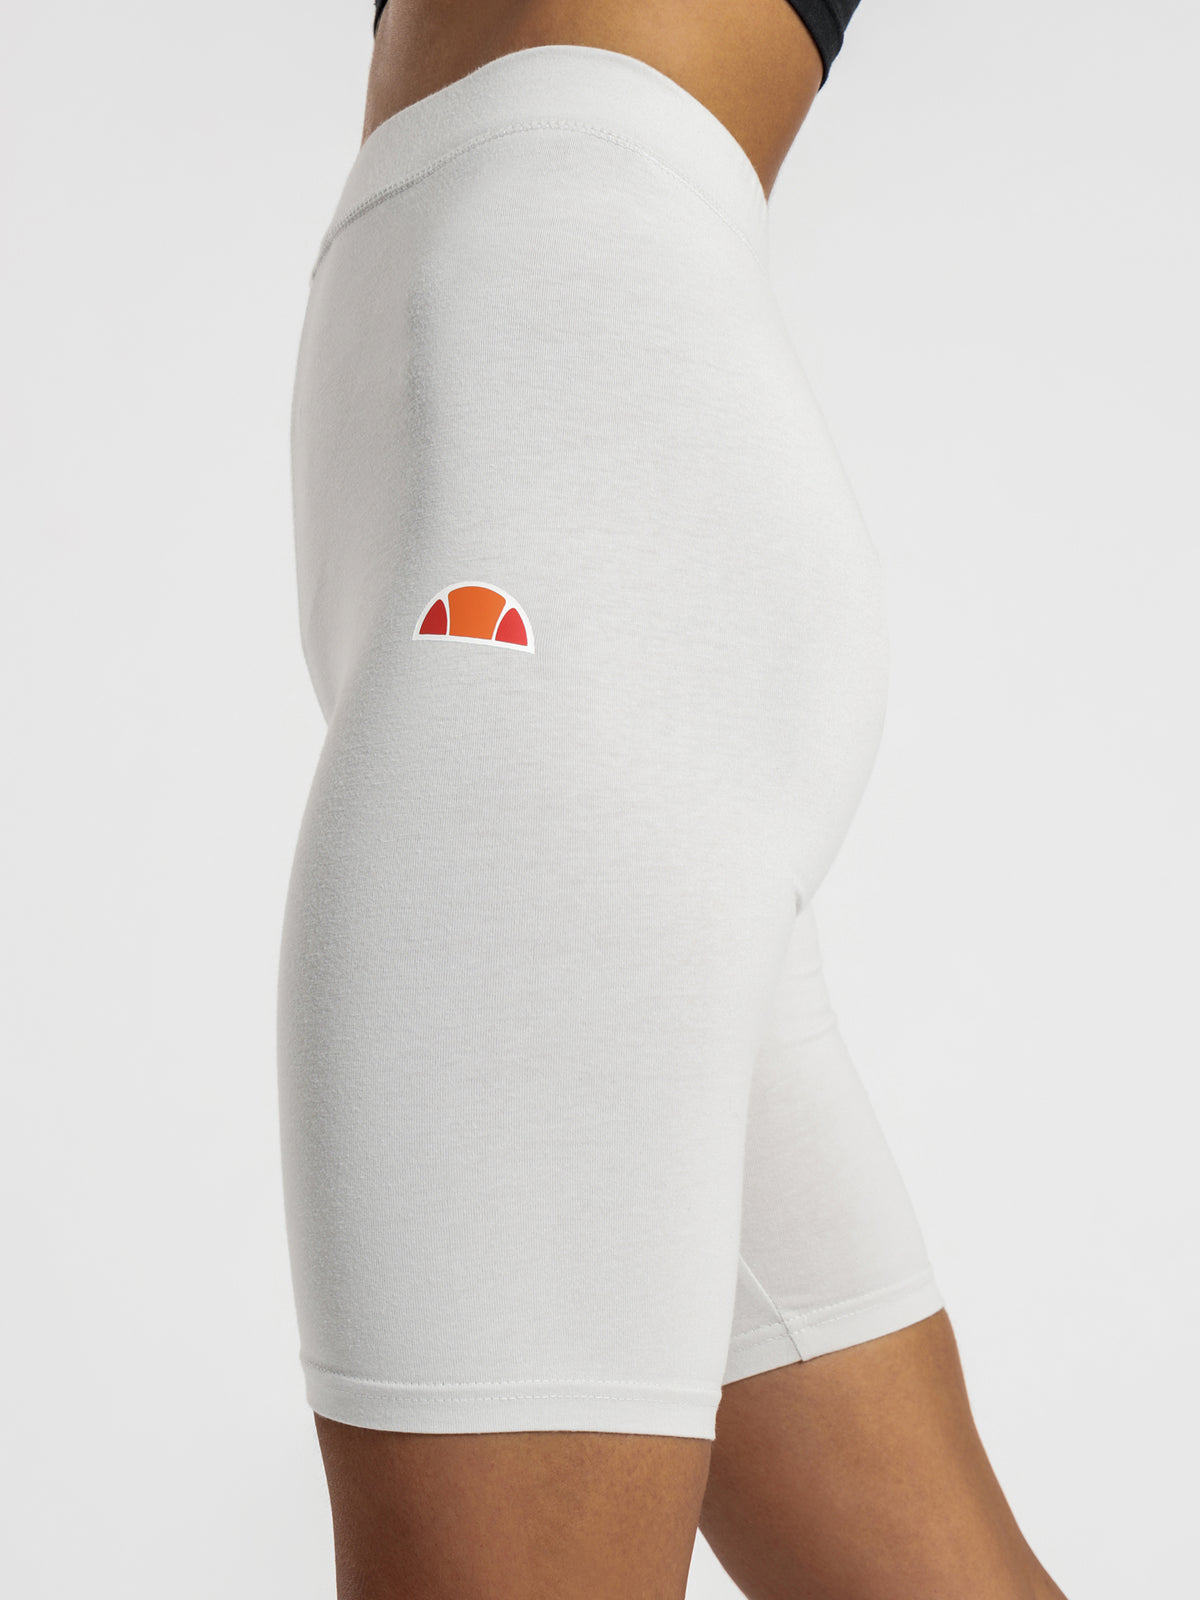 Tour Cycle Shorts in Light Grey